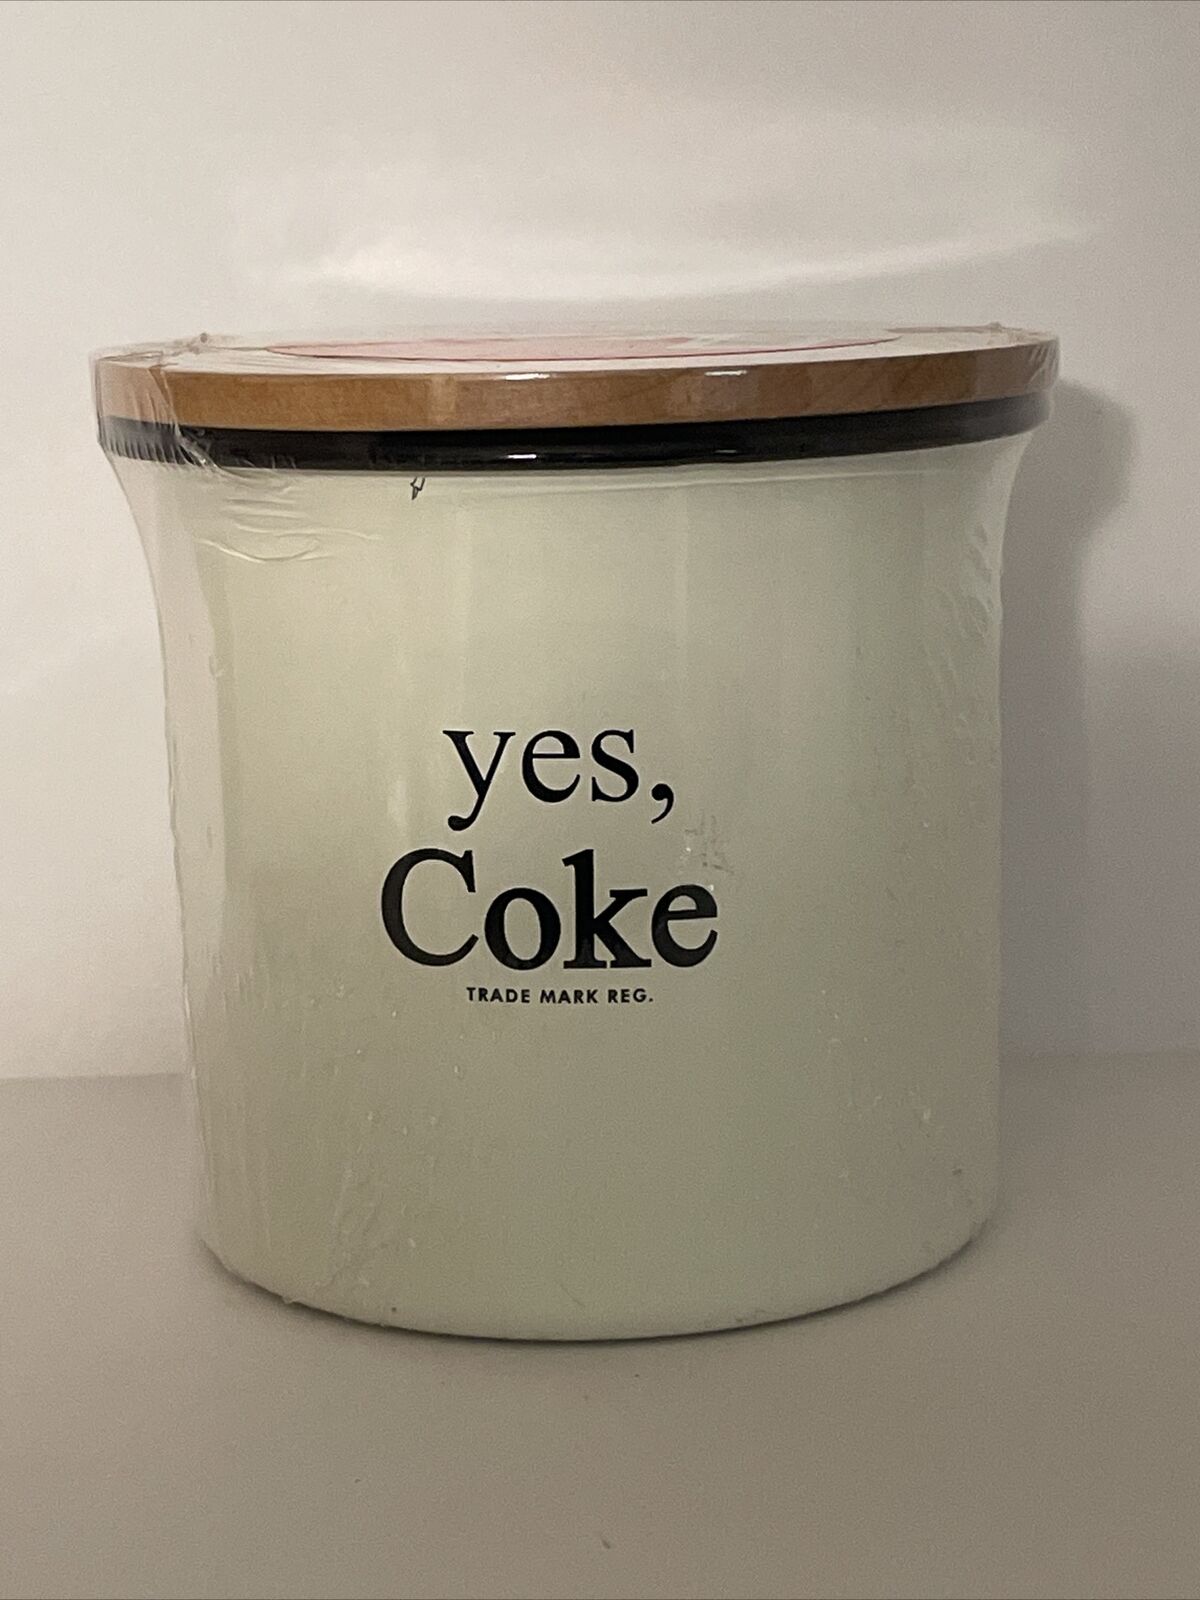 Yes Coke Enamel Canister Wood Lid Coca Cola BRAND NEW SEALED 20 Ounce